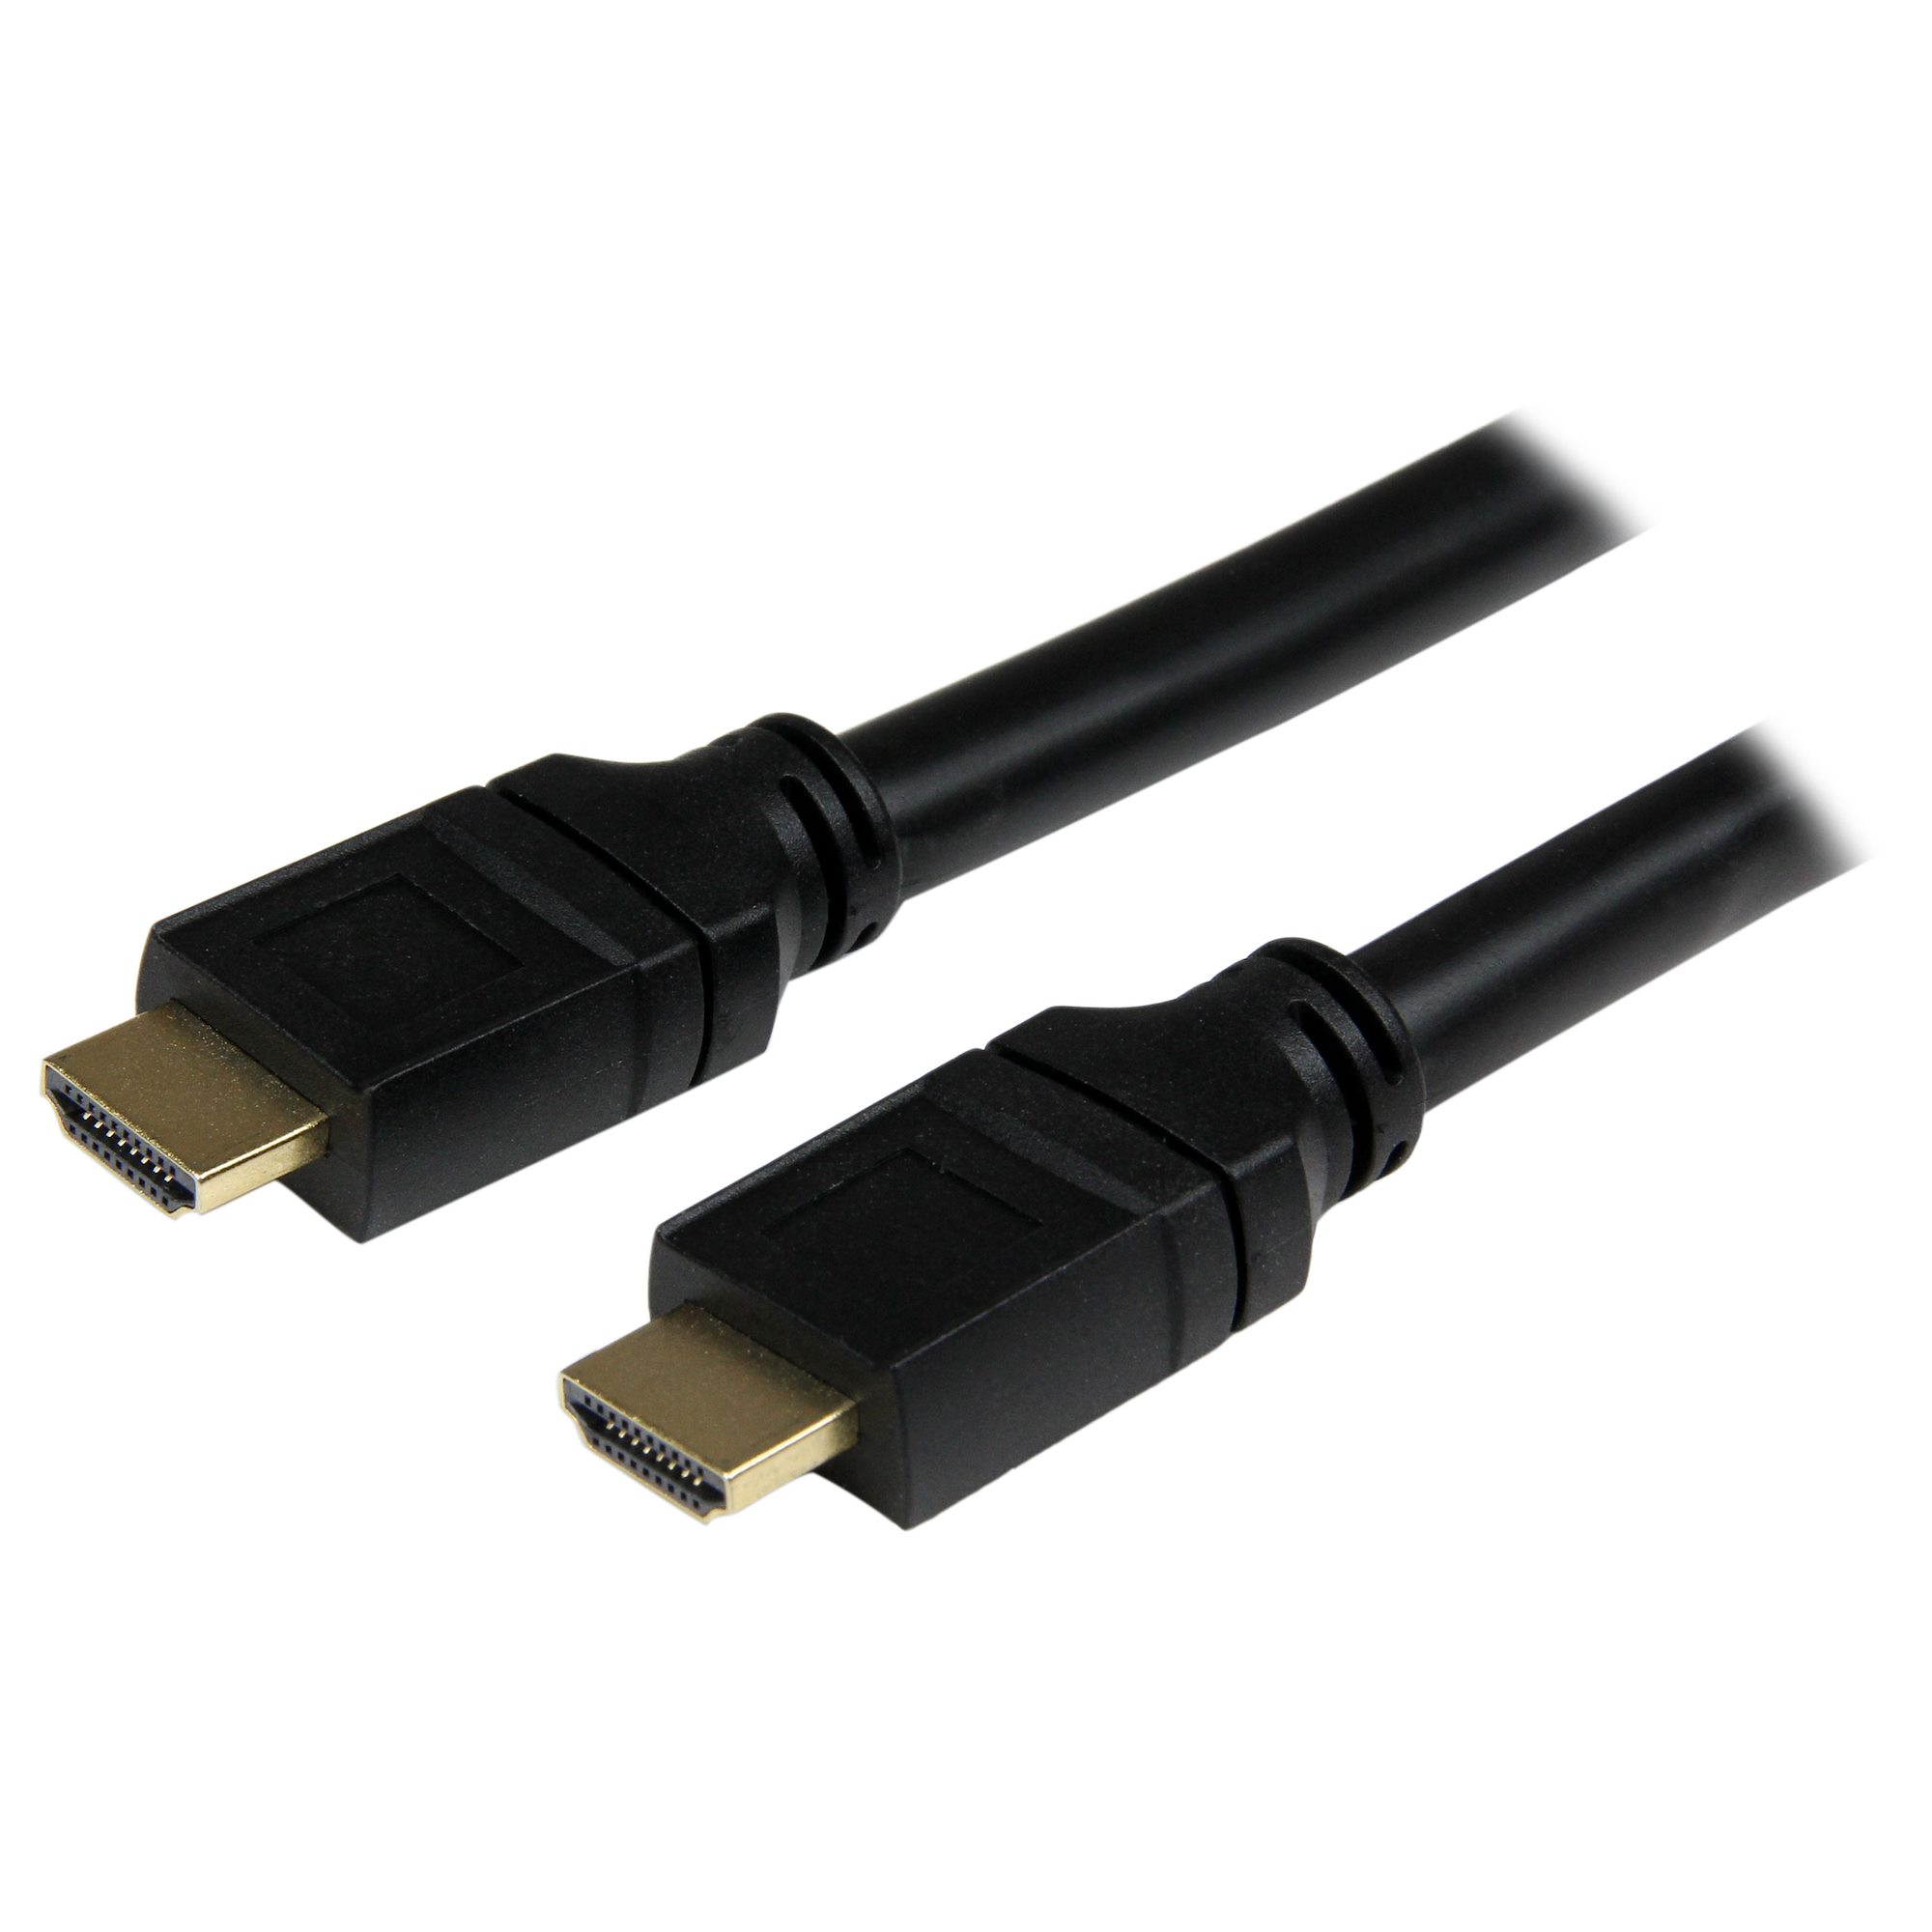 【HDPMM25】25 FT PLENUM-RATED HDMI CABLE